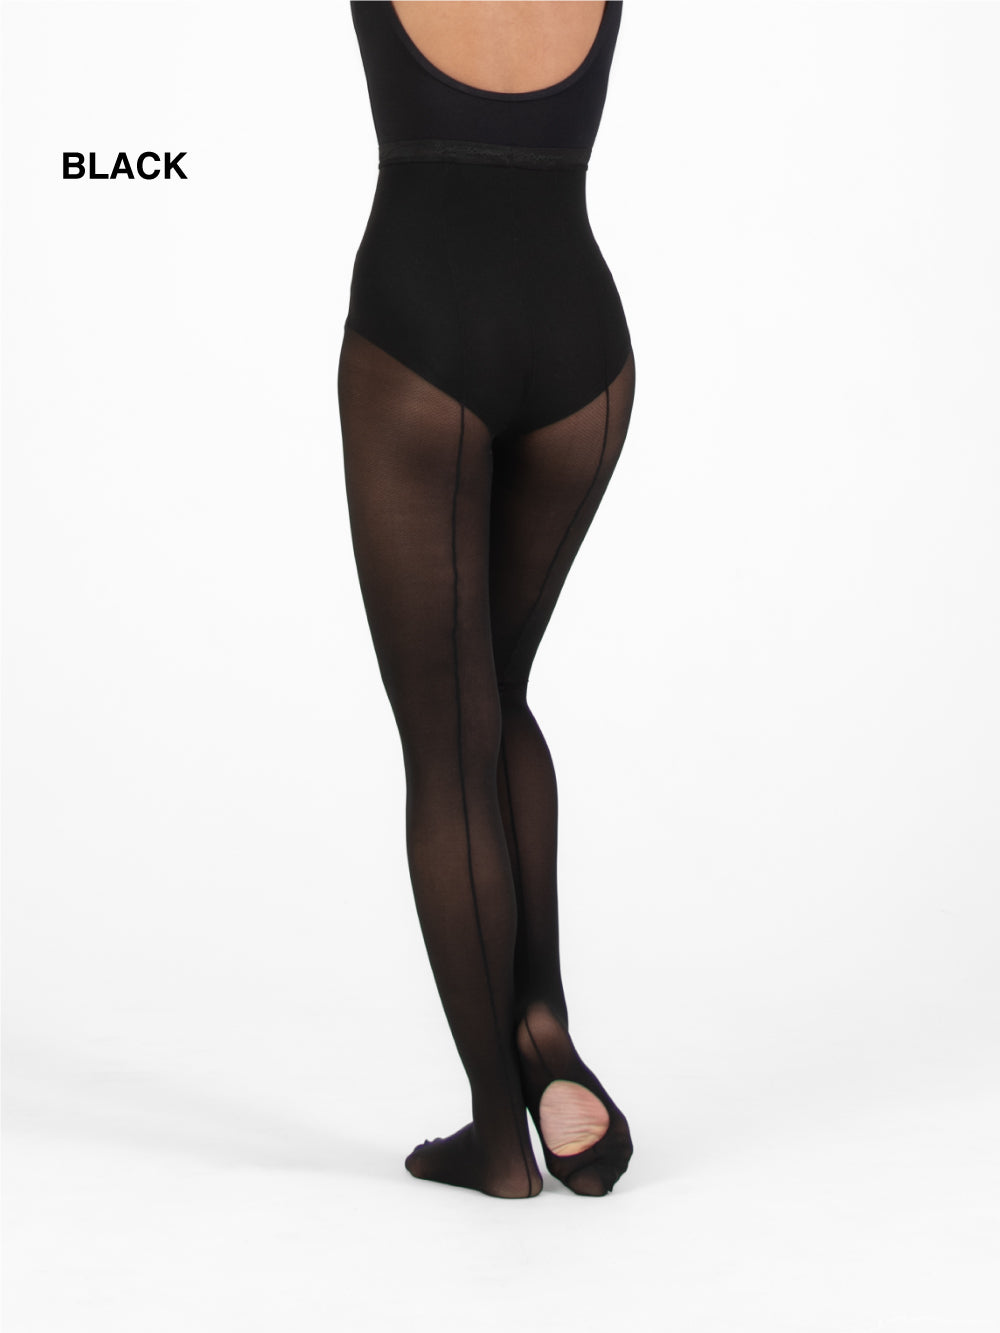 TotalSTRETCH Back Seam Sheer Mesh Convertible Tights